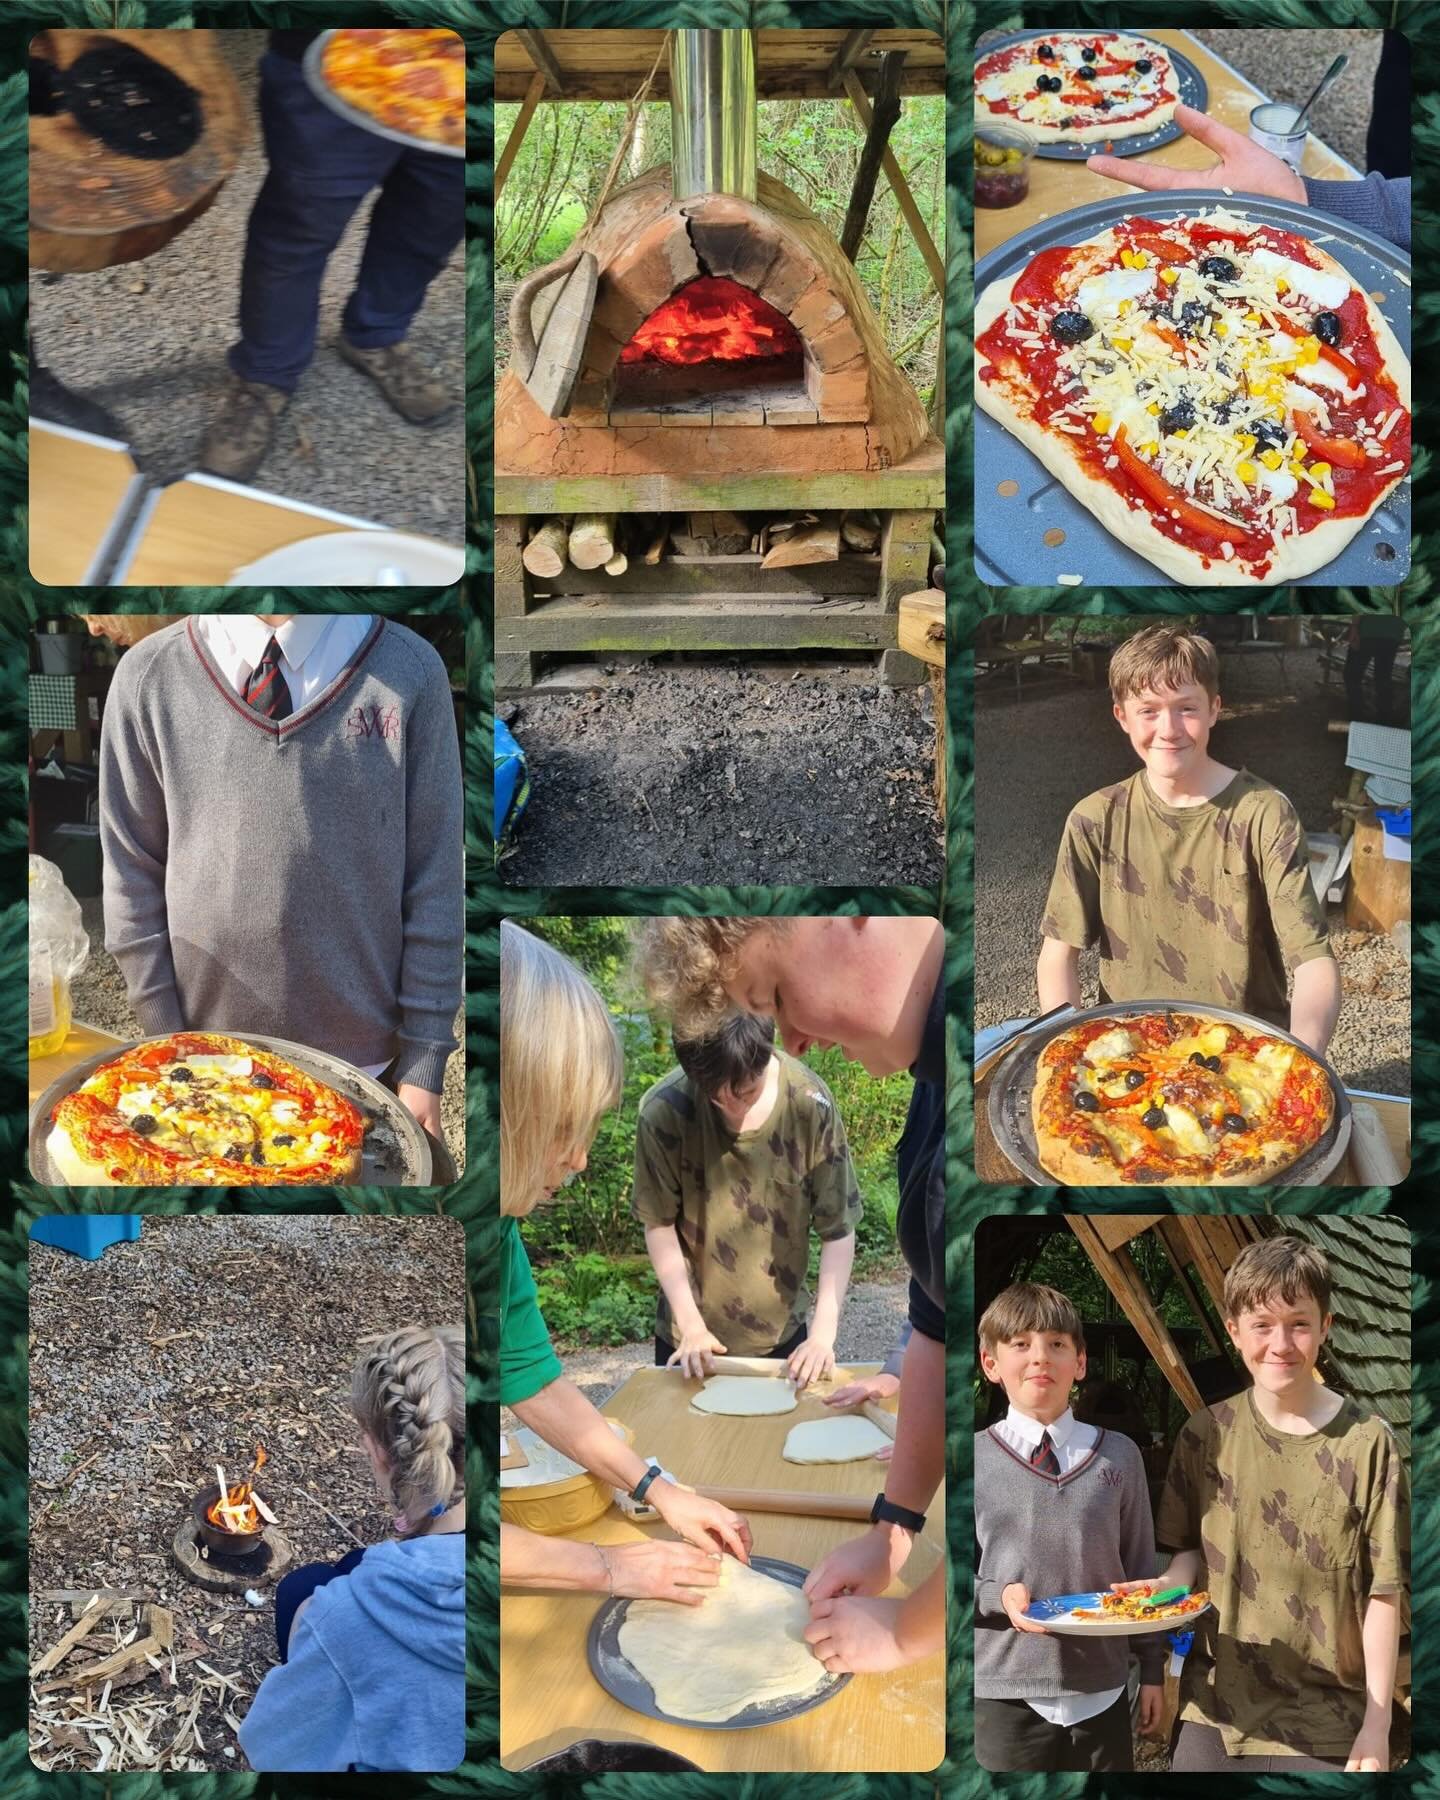 Week # 5 @ Wild Westonbirt - Happa Zome (Leaf printing) pizza making, s&rsquo;mores &amp; whittling plus a beautiful poem written by one of our group